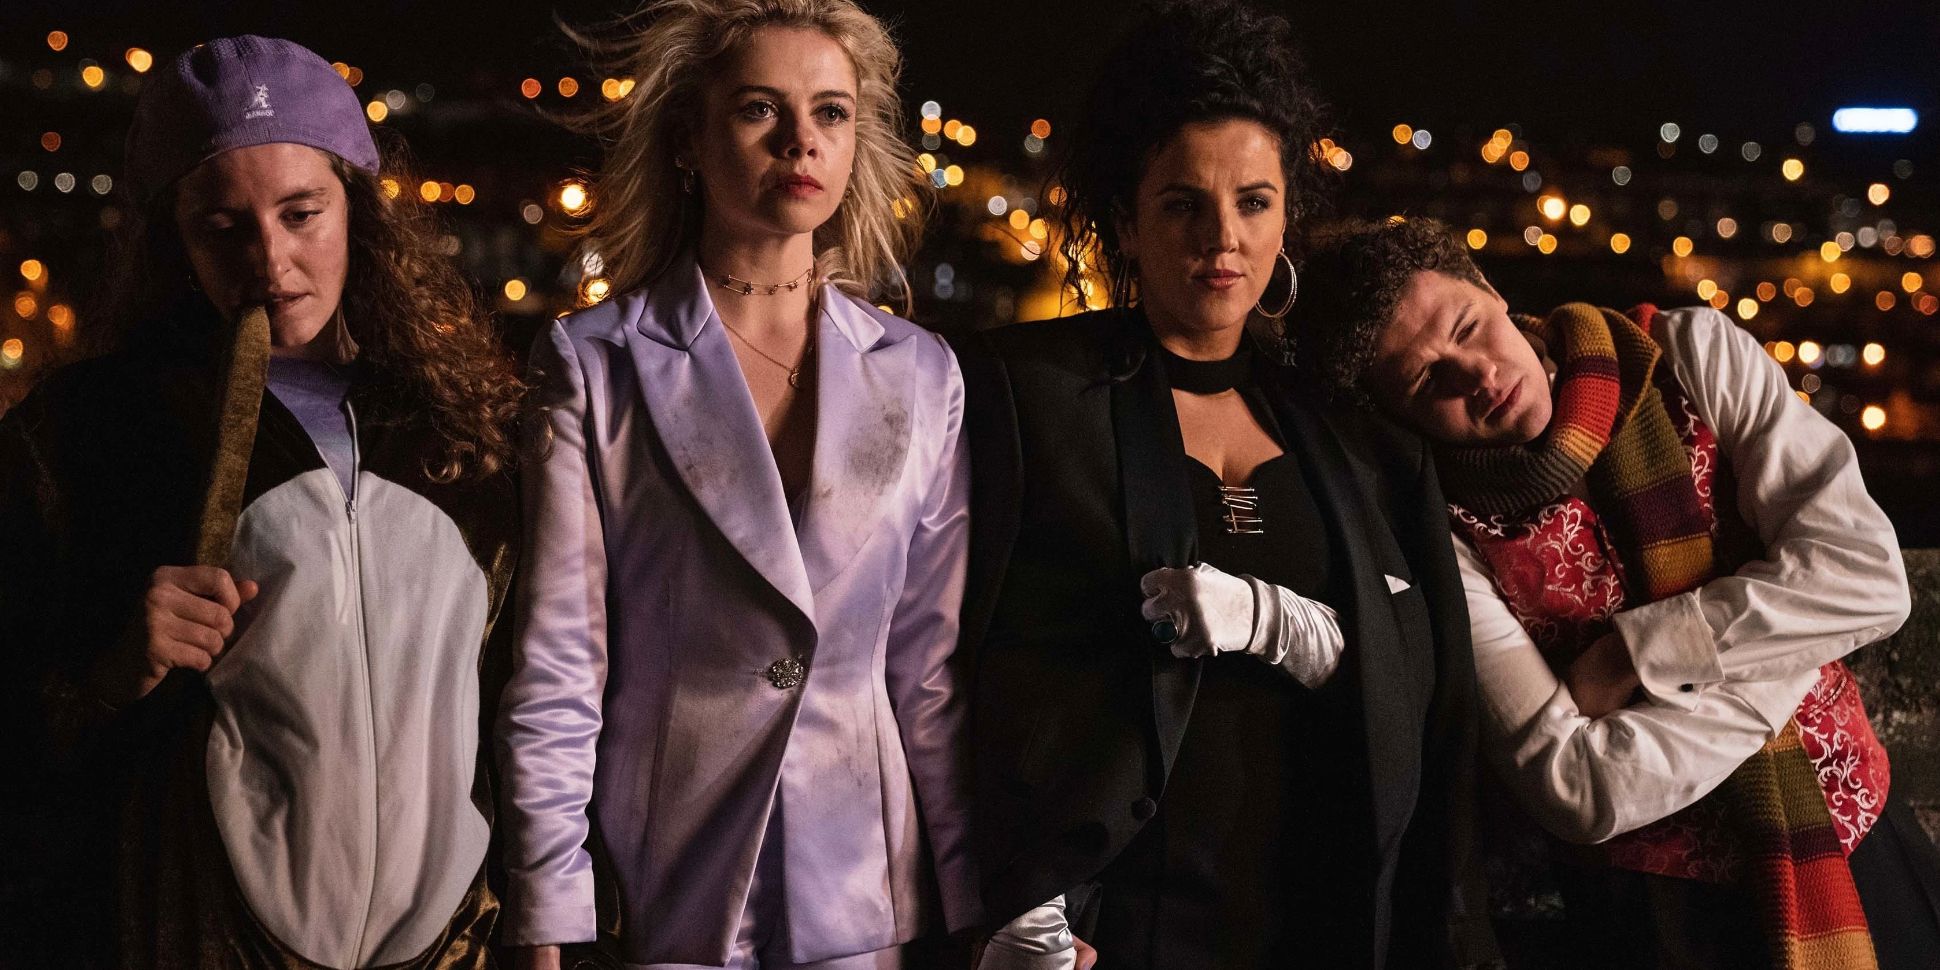 Orla, Erin, Michelle, and James stand together against the Derry skyline in Derry Girls series finale